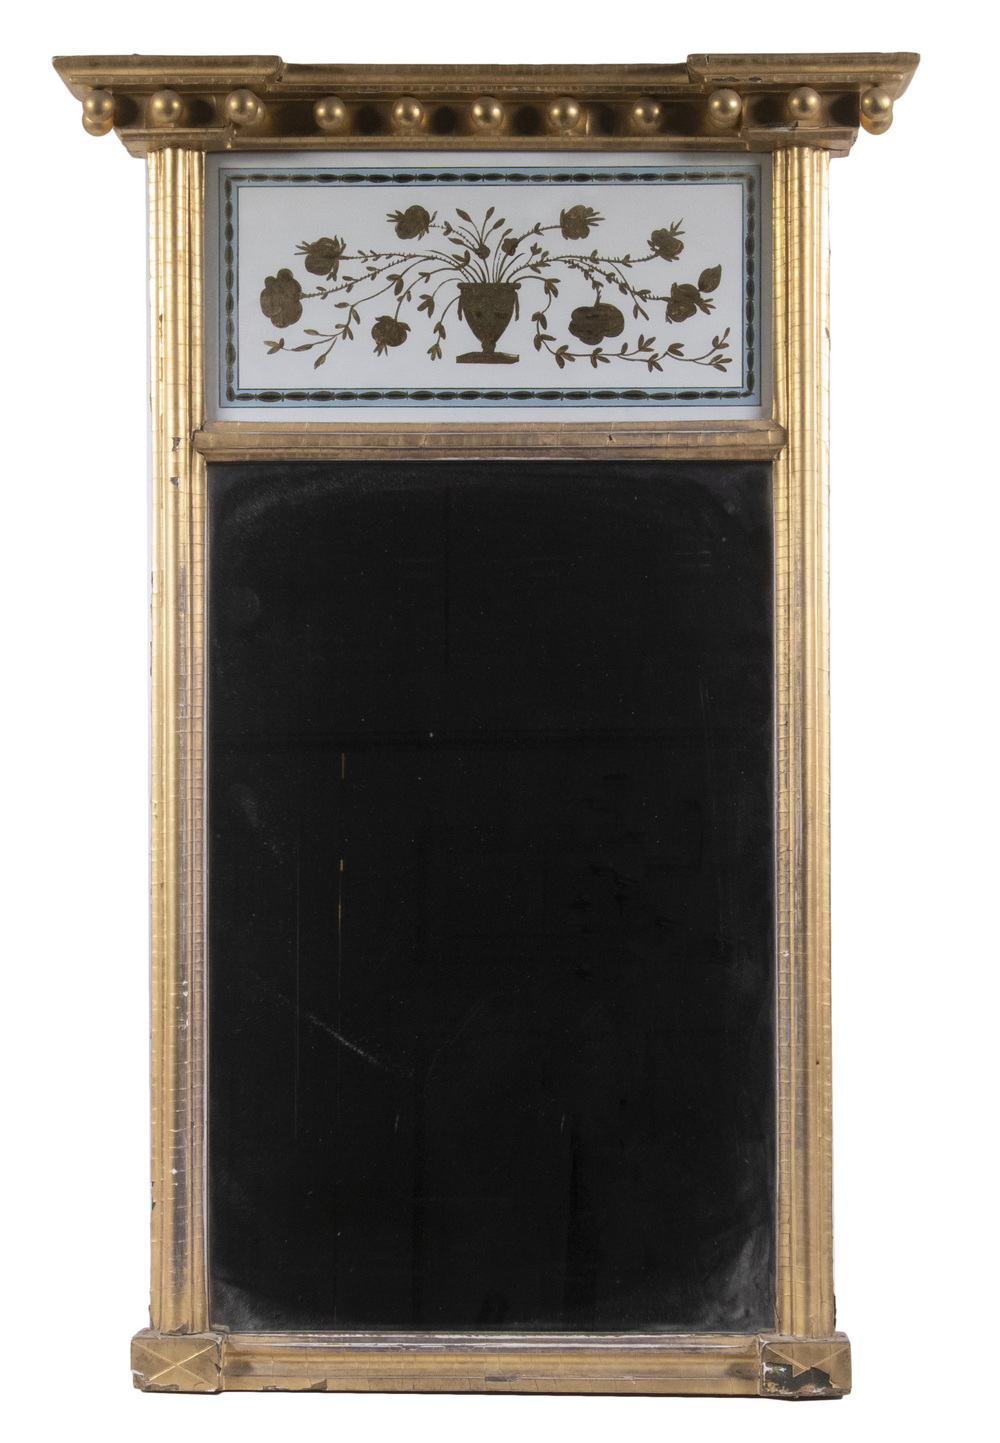 CLASSICAL GILDED EGLOMISE MIRROR